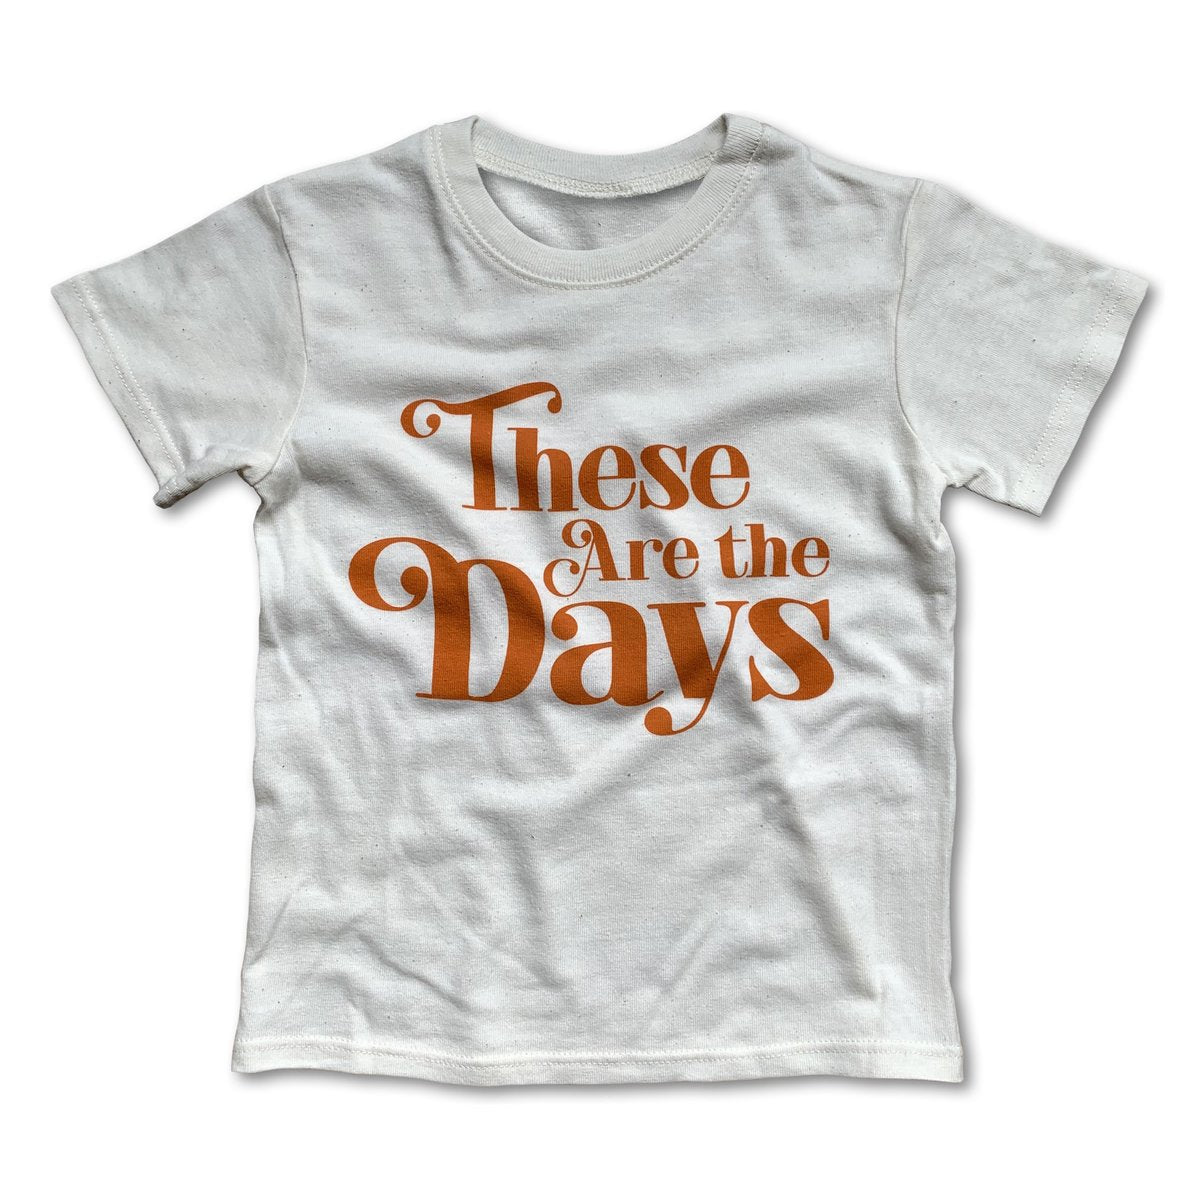 These Are the Days Tee TheT43Shop